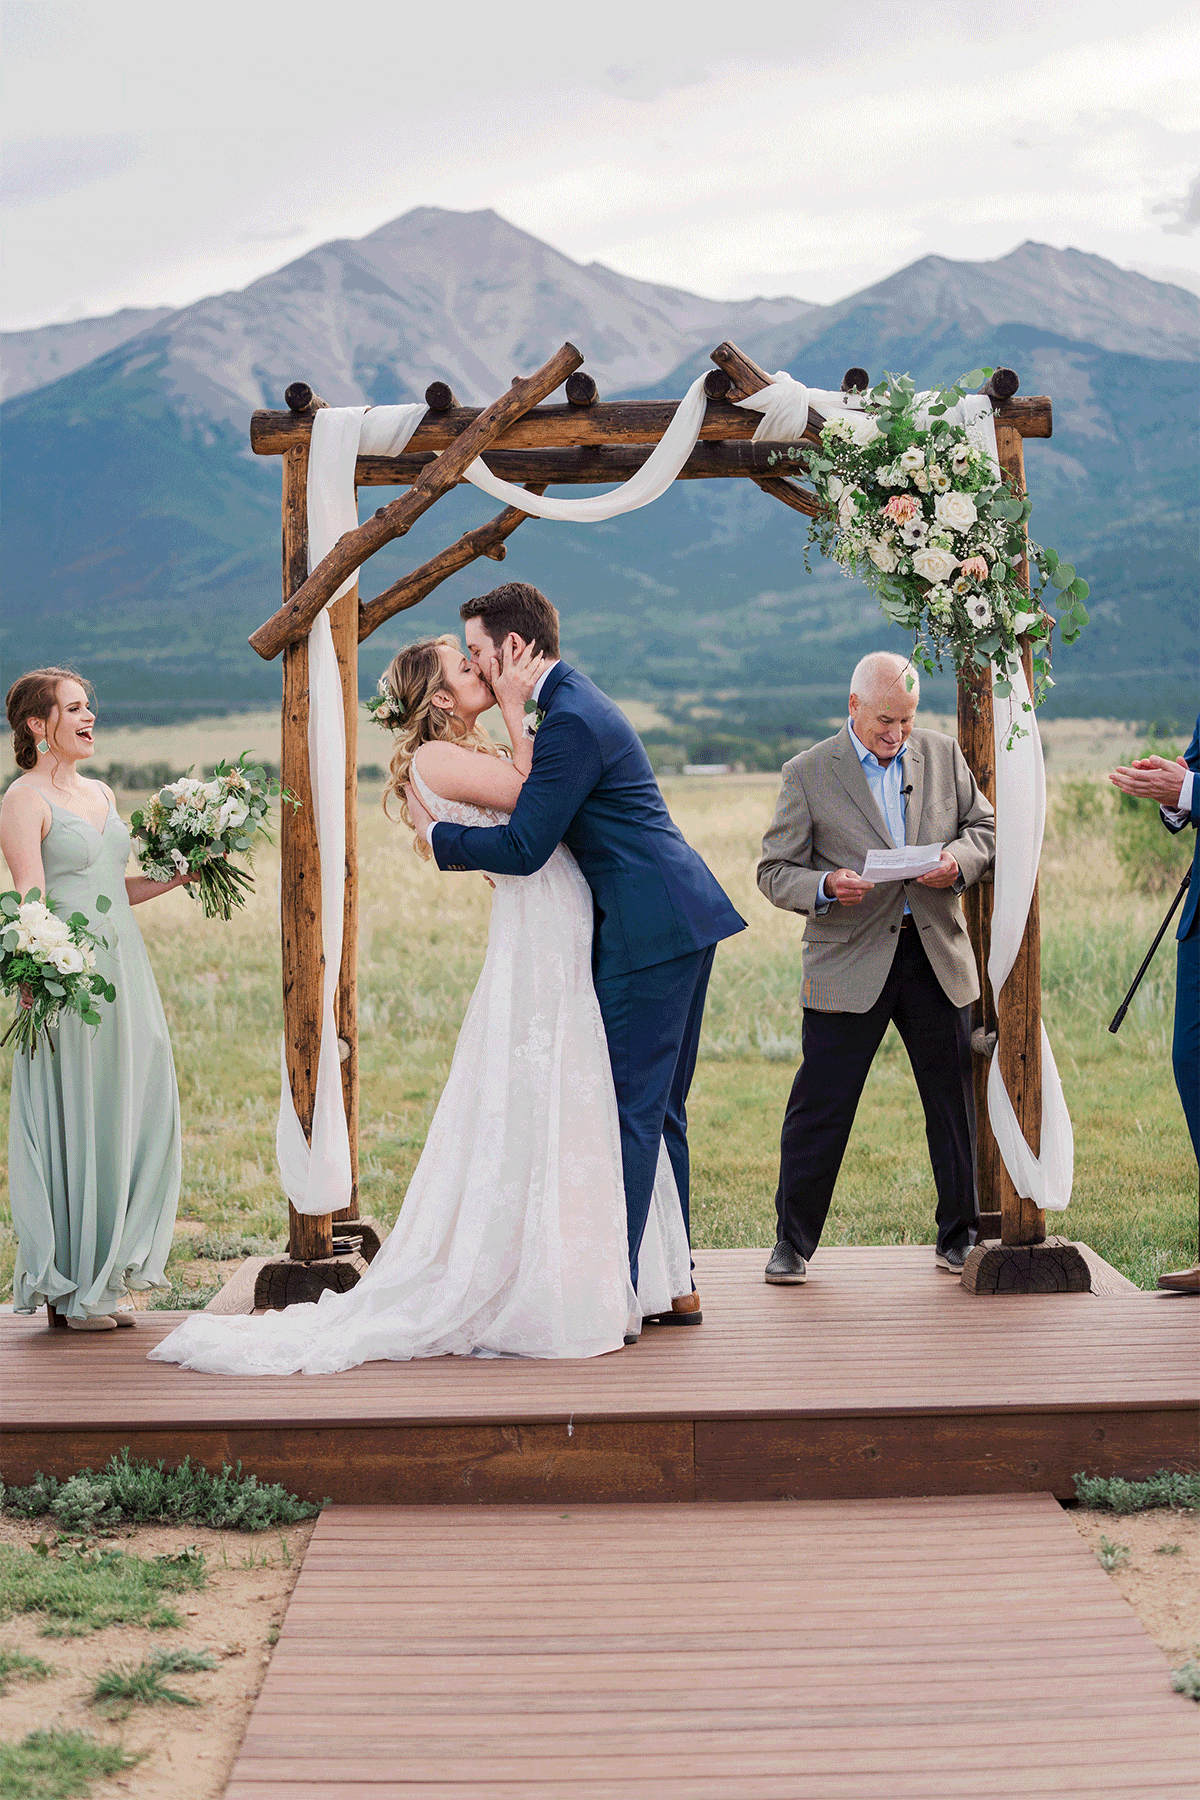 From breathtaking mountain views to intimate outdoor settings, trust Sam Immer Photography to capture your dream Colorado wedding with our expert eye for natural beauty and romantic storytelling.